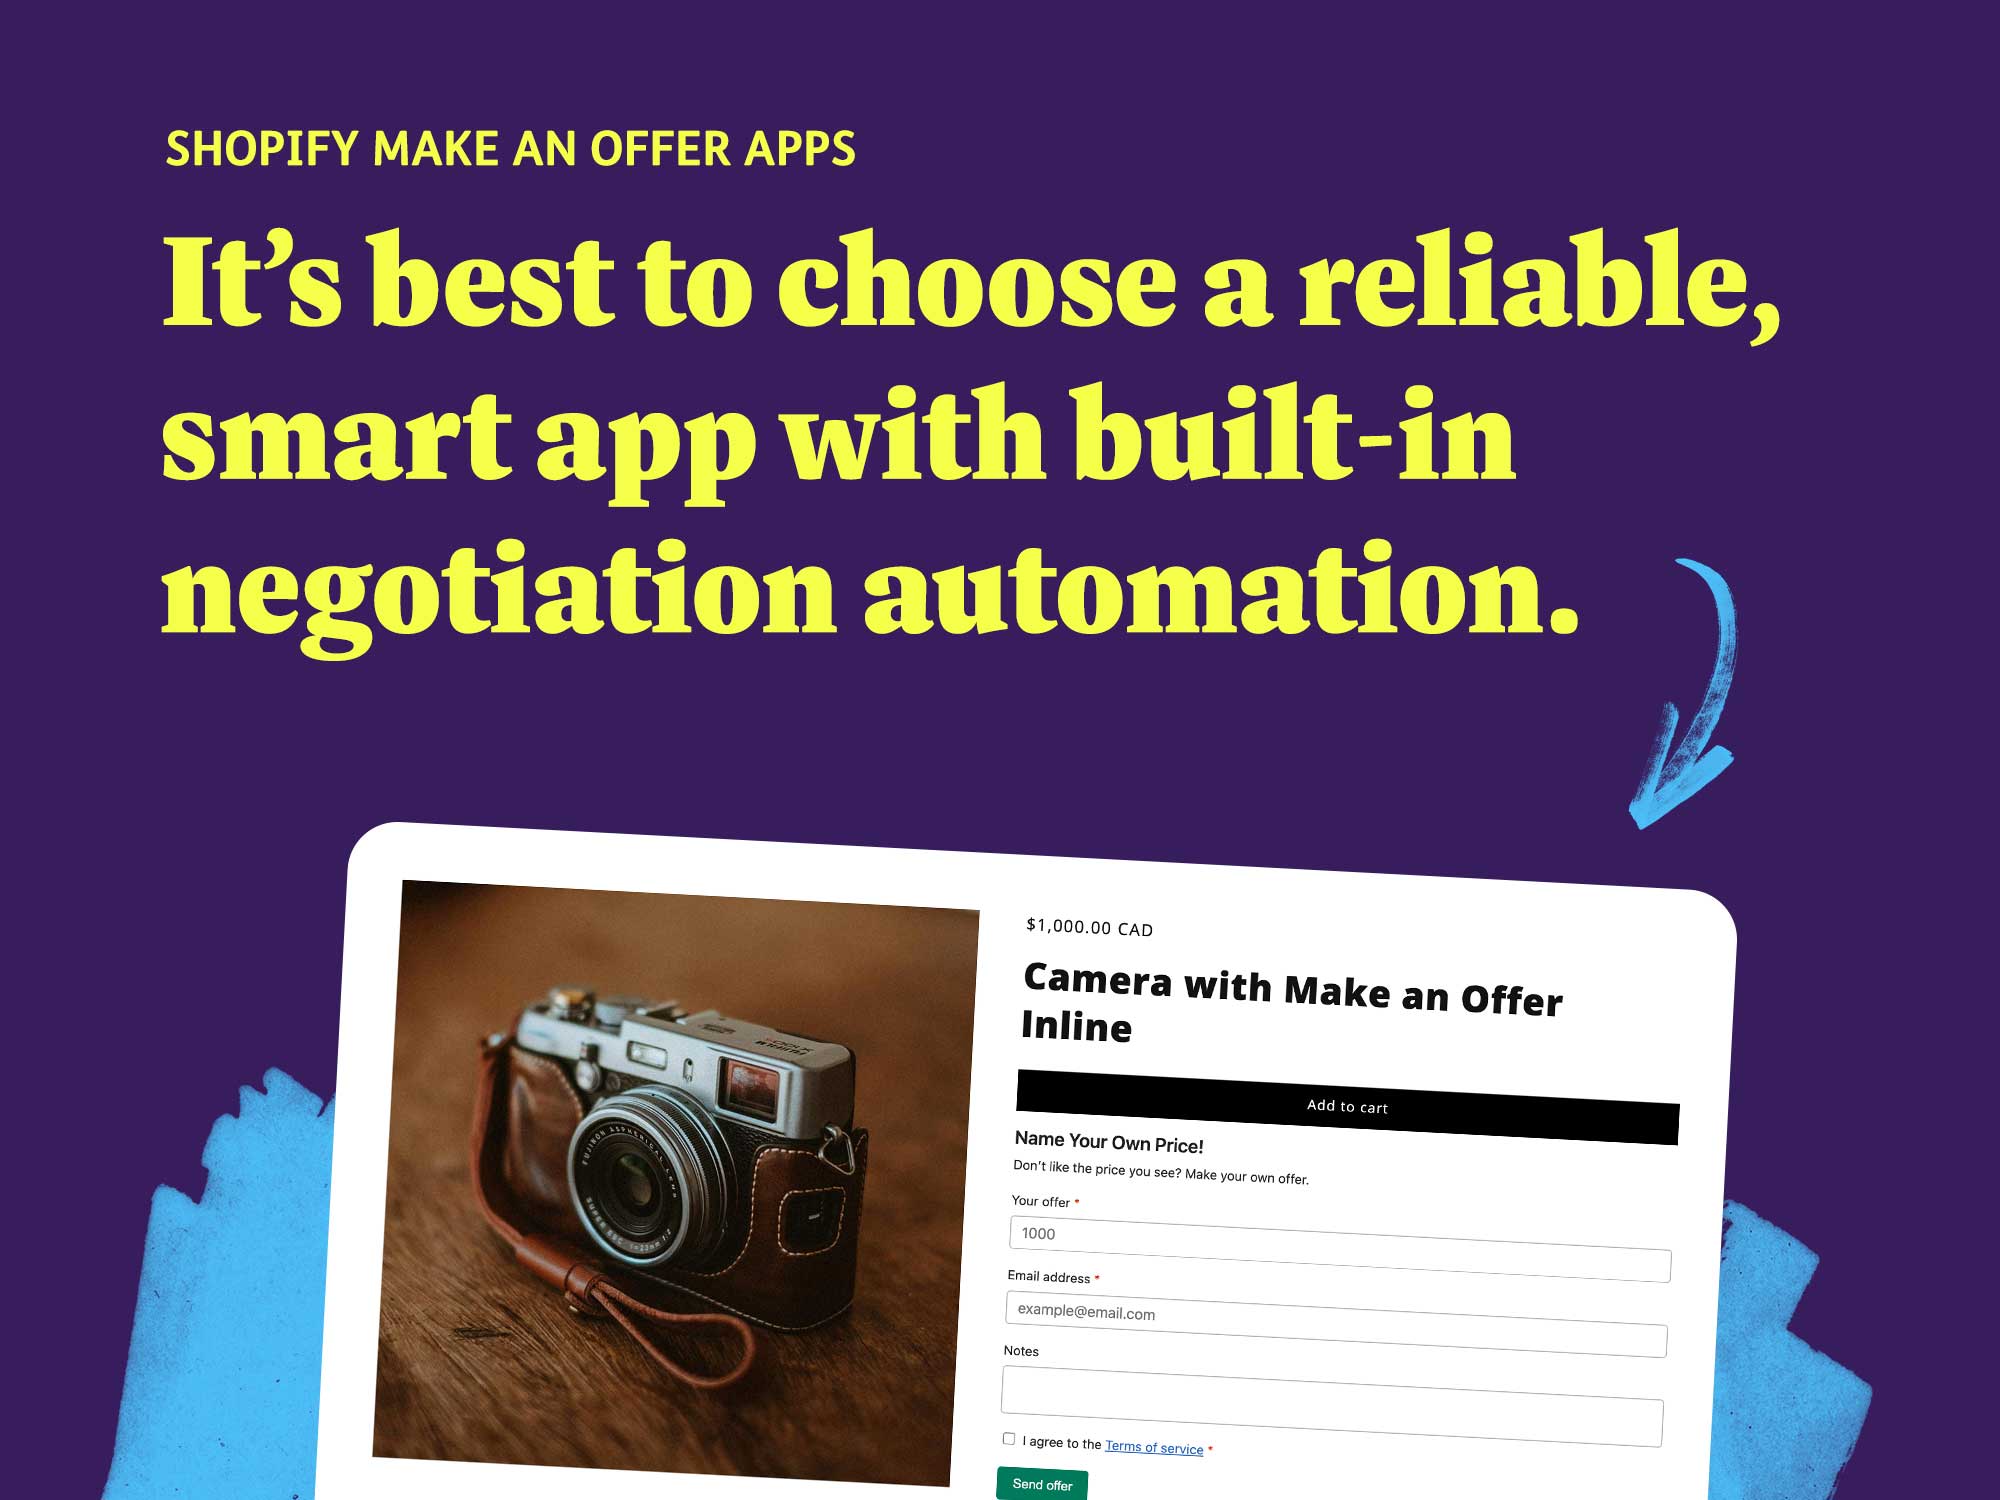 Shopify make an offer apps: It’s best to choose a reliable, smart app with built-in negotiation automation.